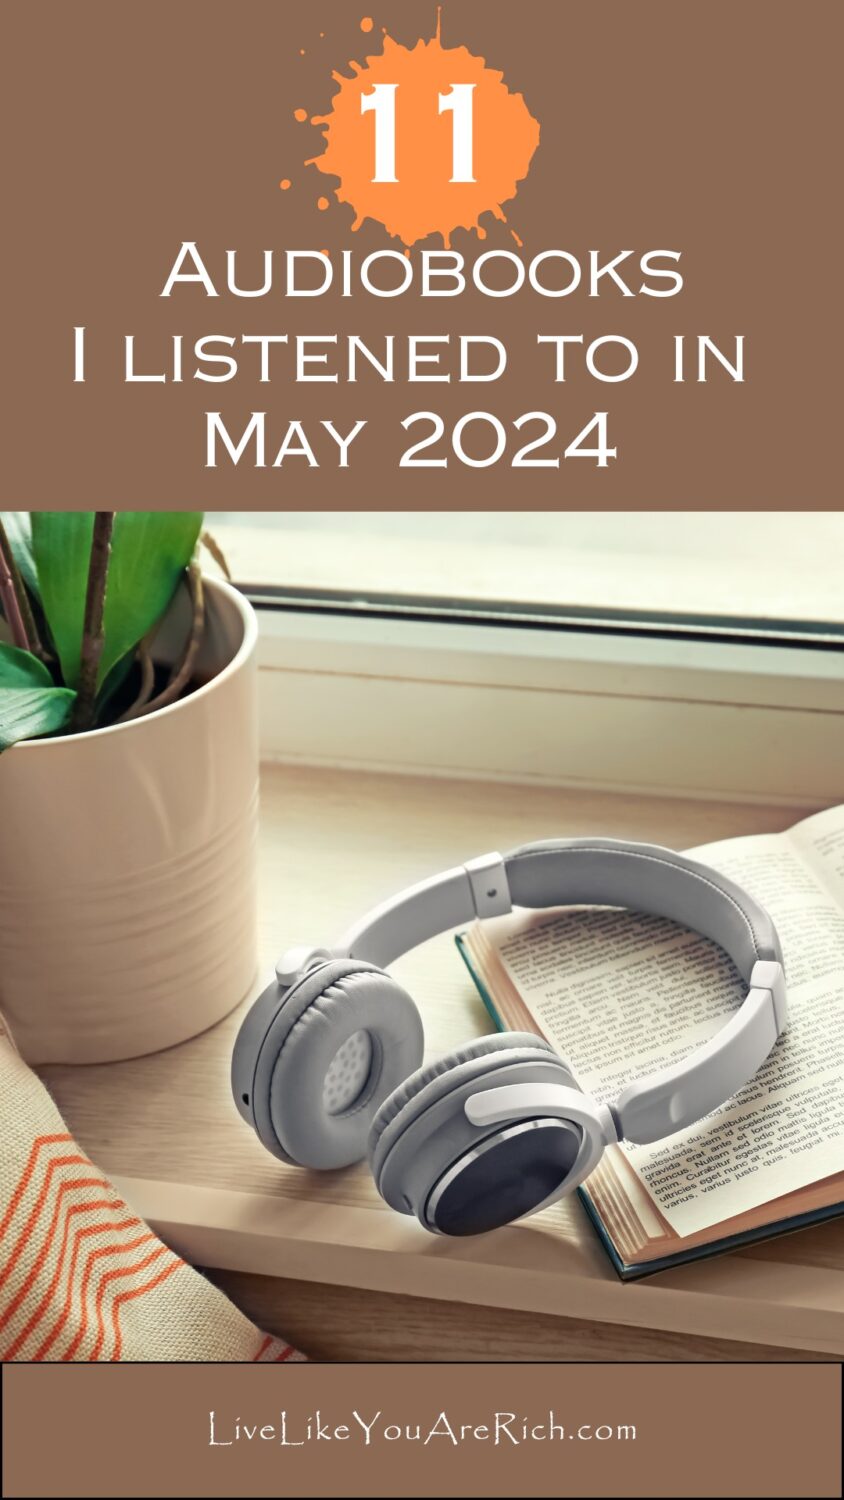 11 Audiobooks I Listened To In May 2024